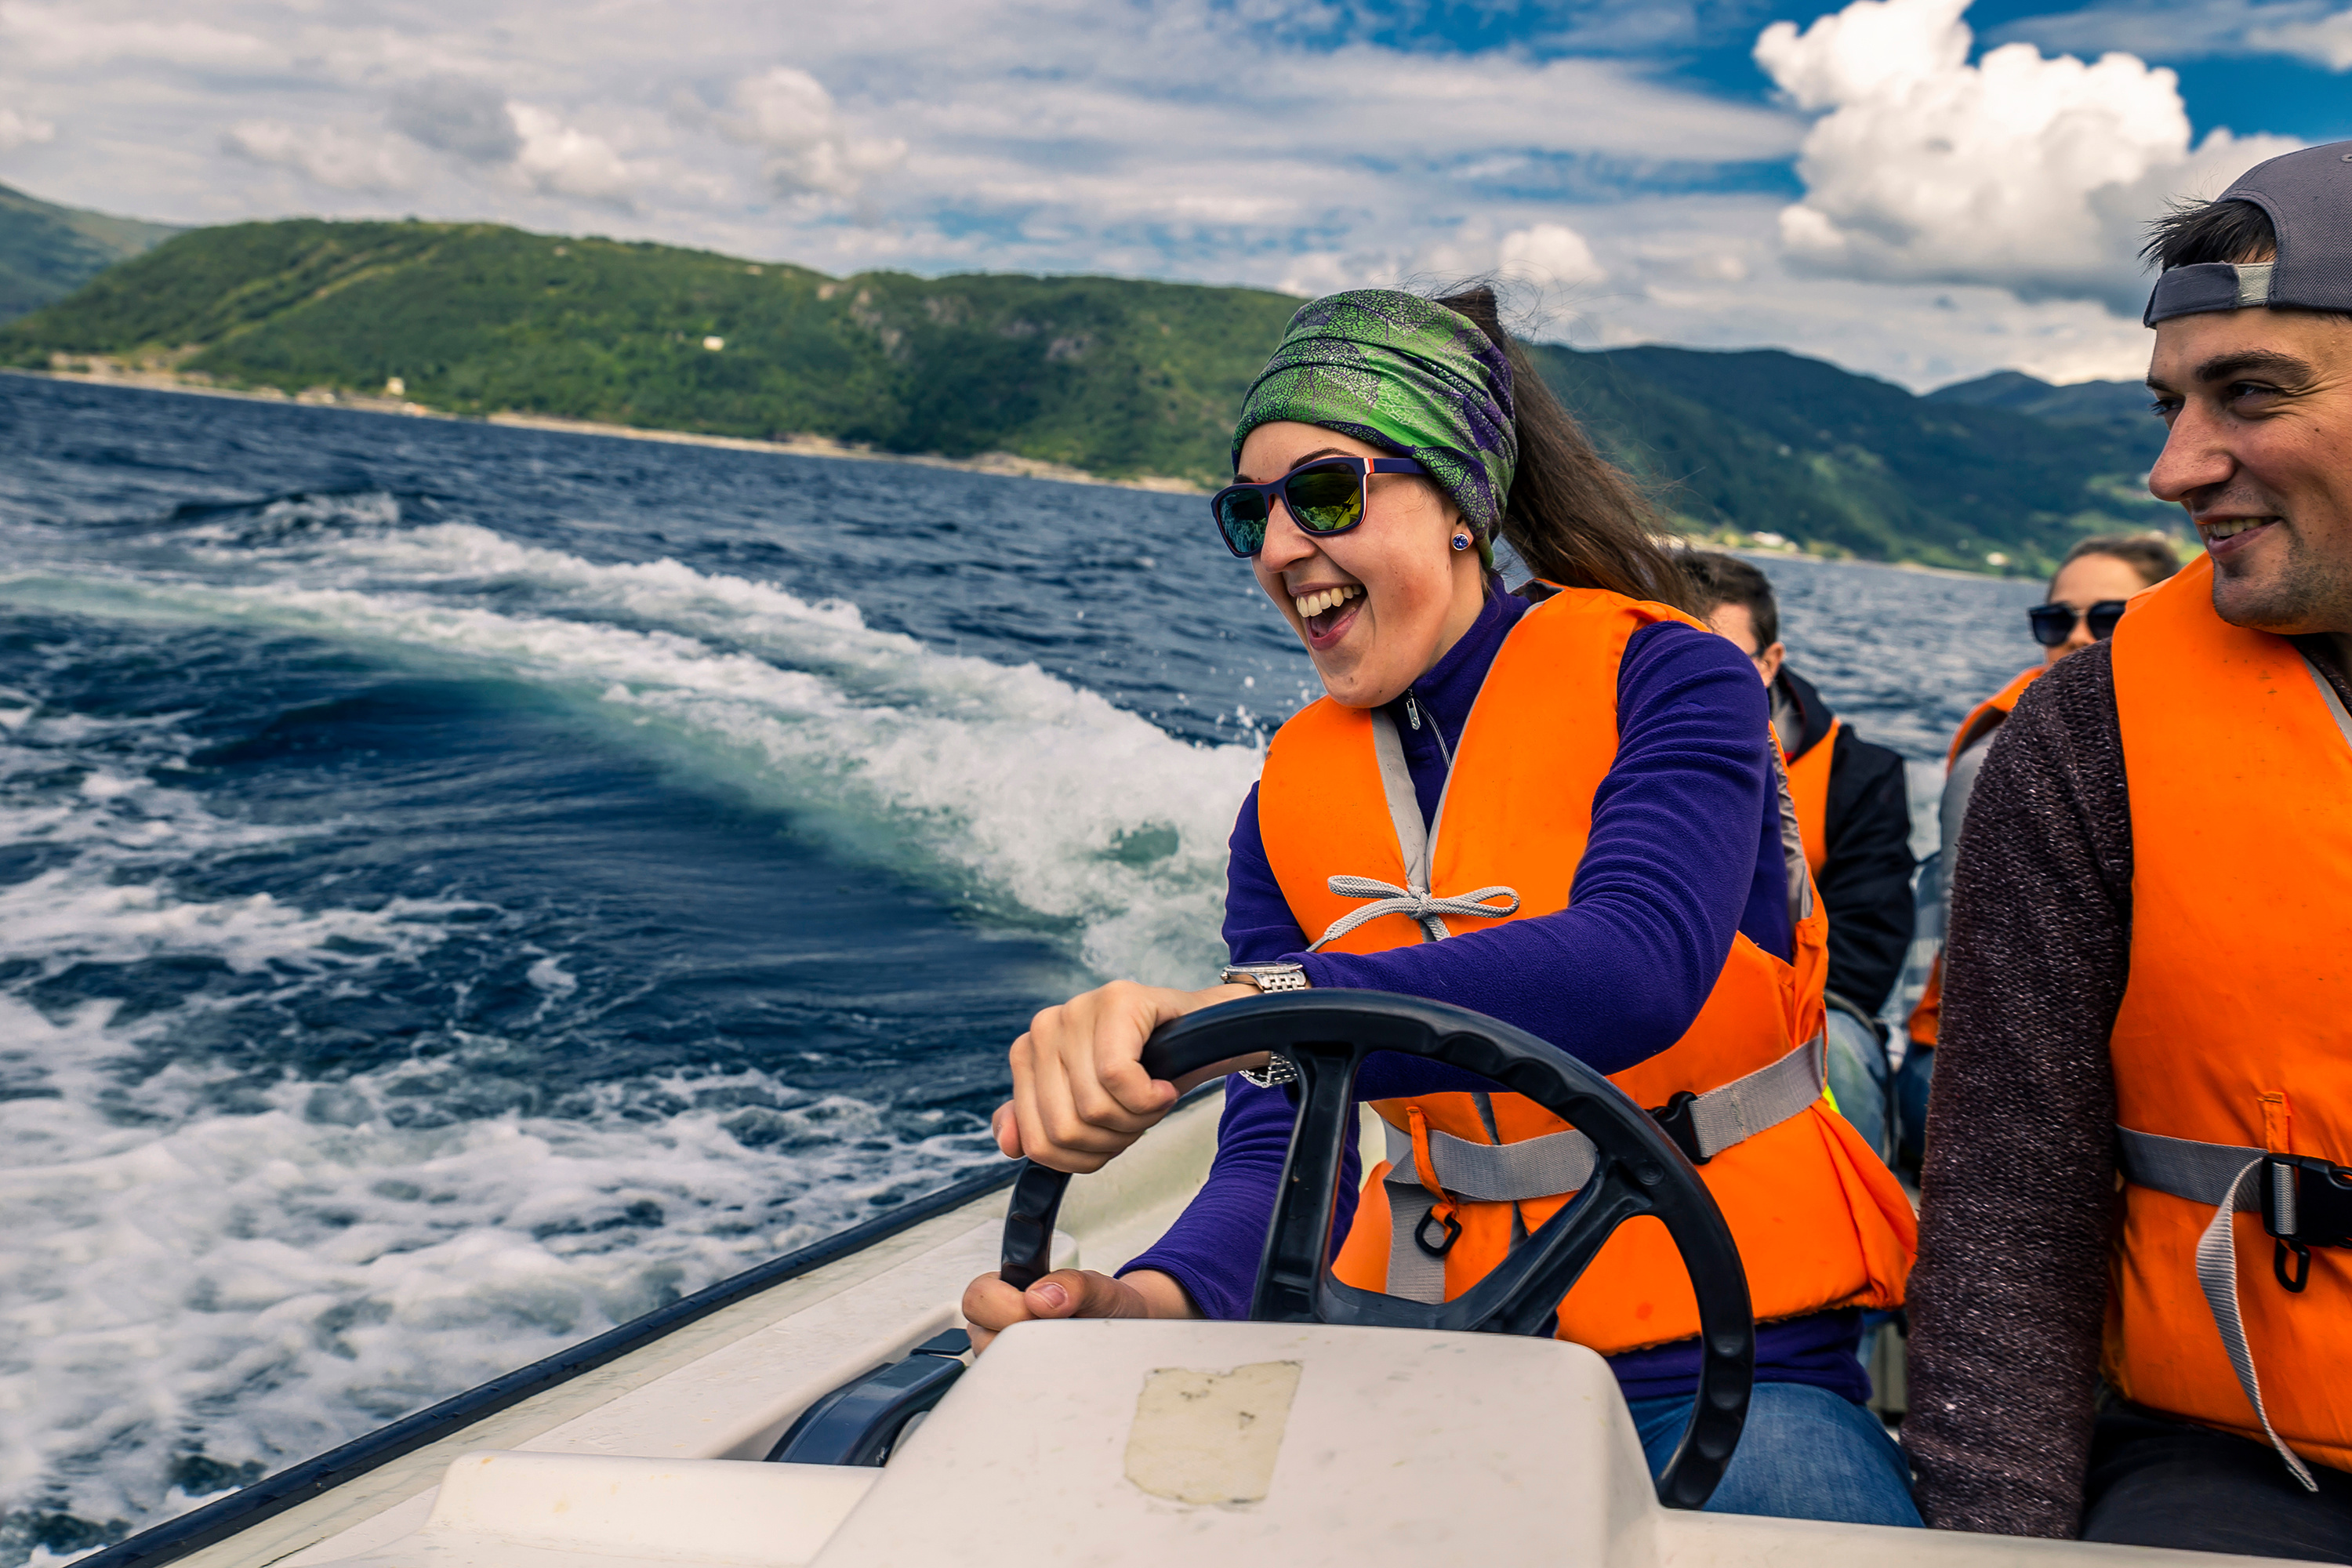 A woman wears a lifejacket and drives a boat, boating safety course concept. 